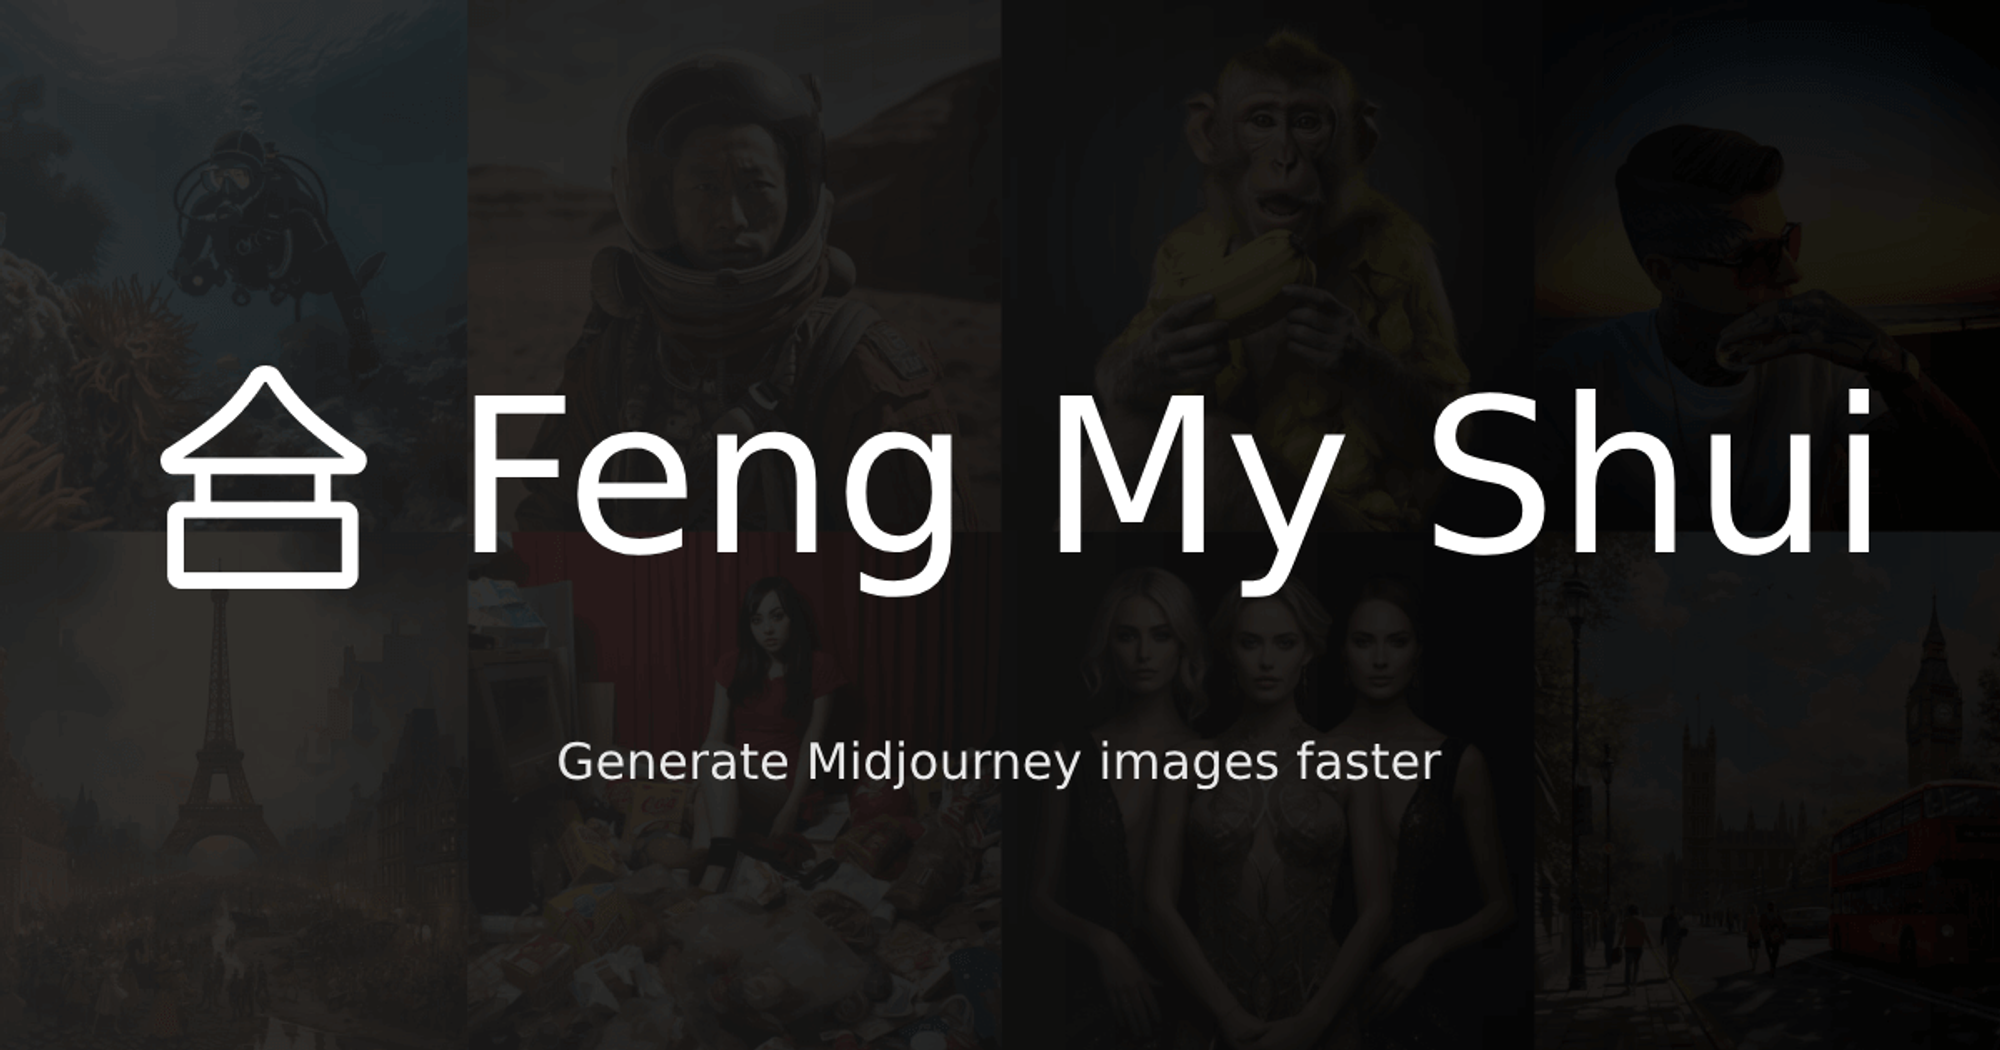 Feng My Shui - Midjourney App & Stable Diffusion XL